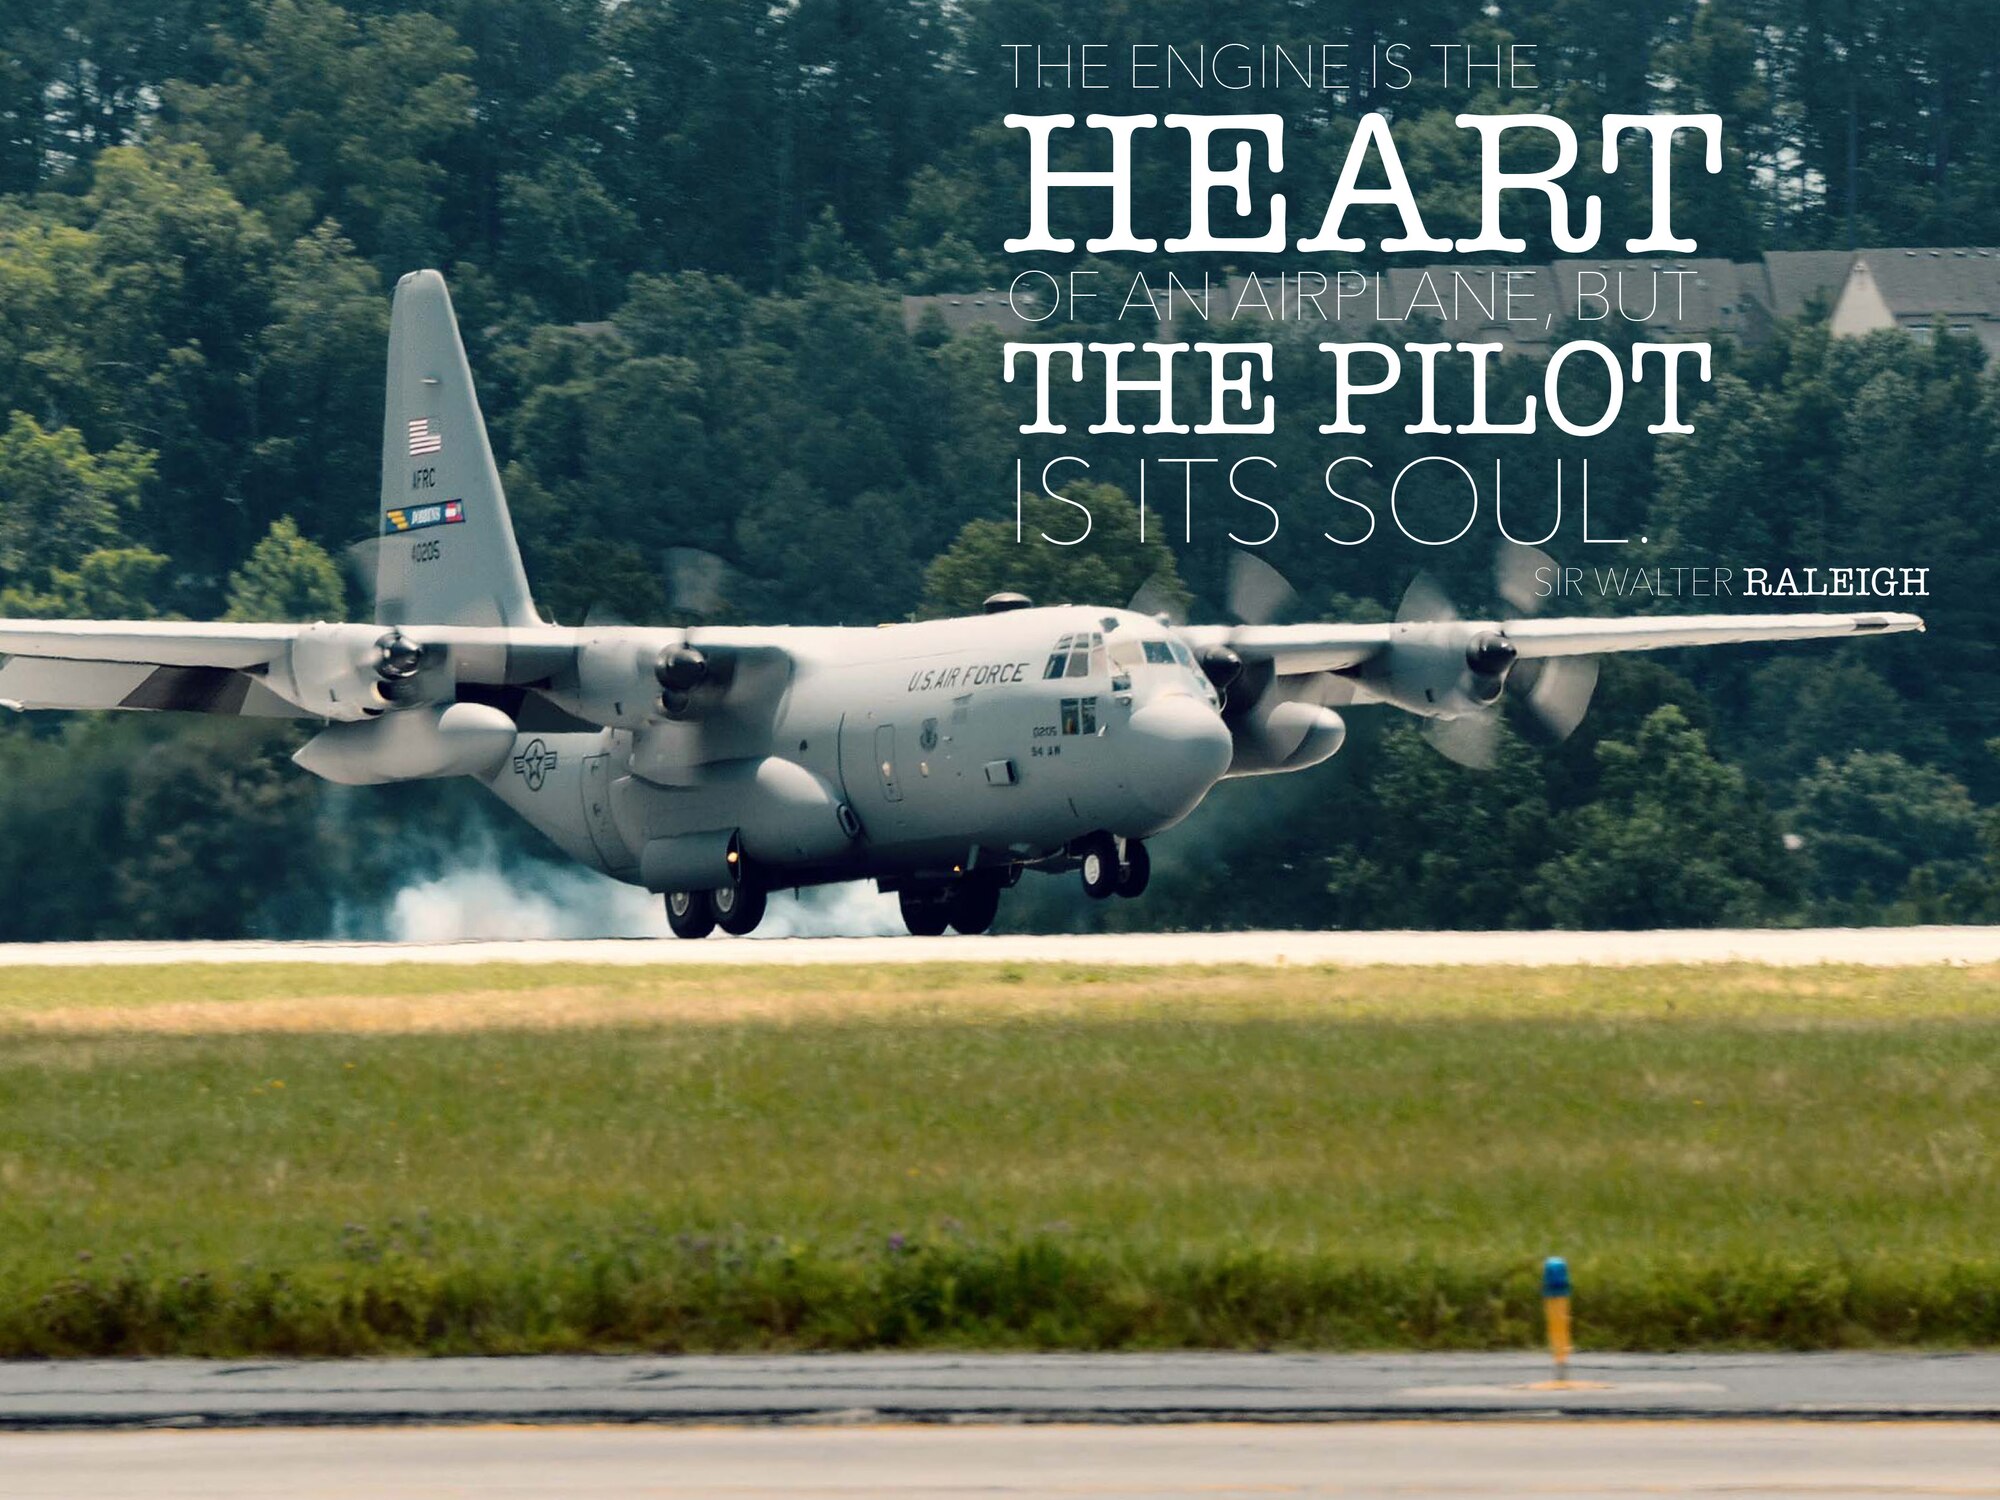 This week's motivation is from Sir Walter Raleigh:

"The engine is the heart of an airplane, but the pilot is its soul."

(U.S. Air Force graphic/Staff Sgt. Andrew Park)